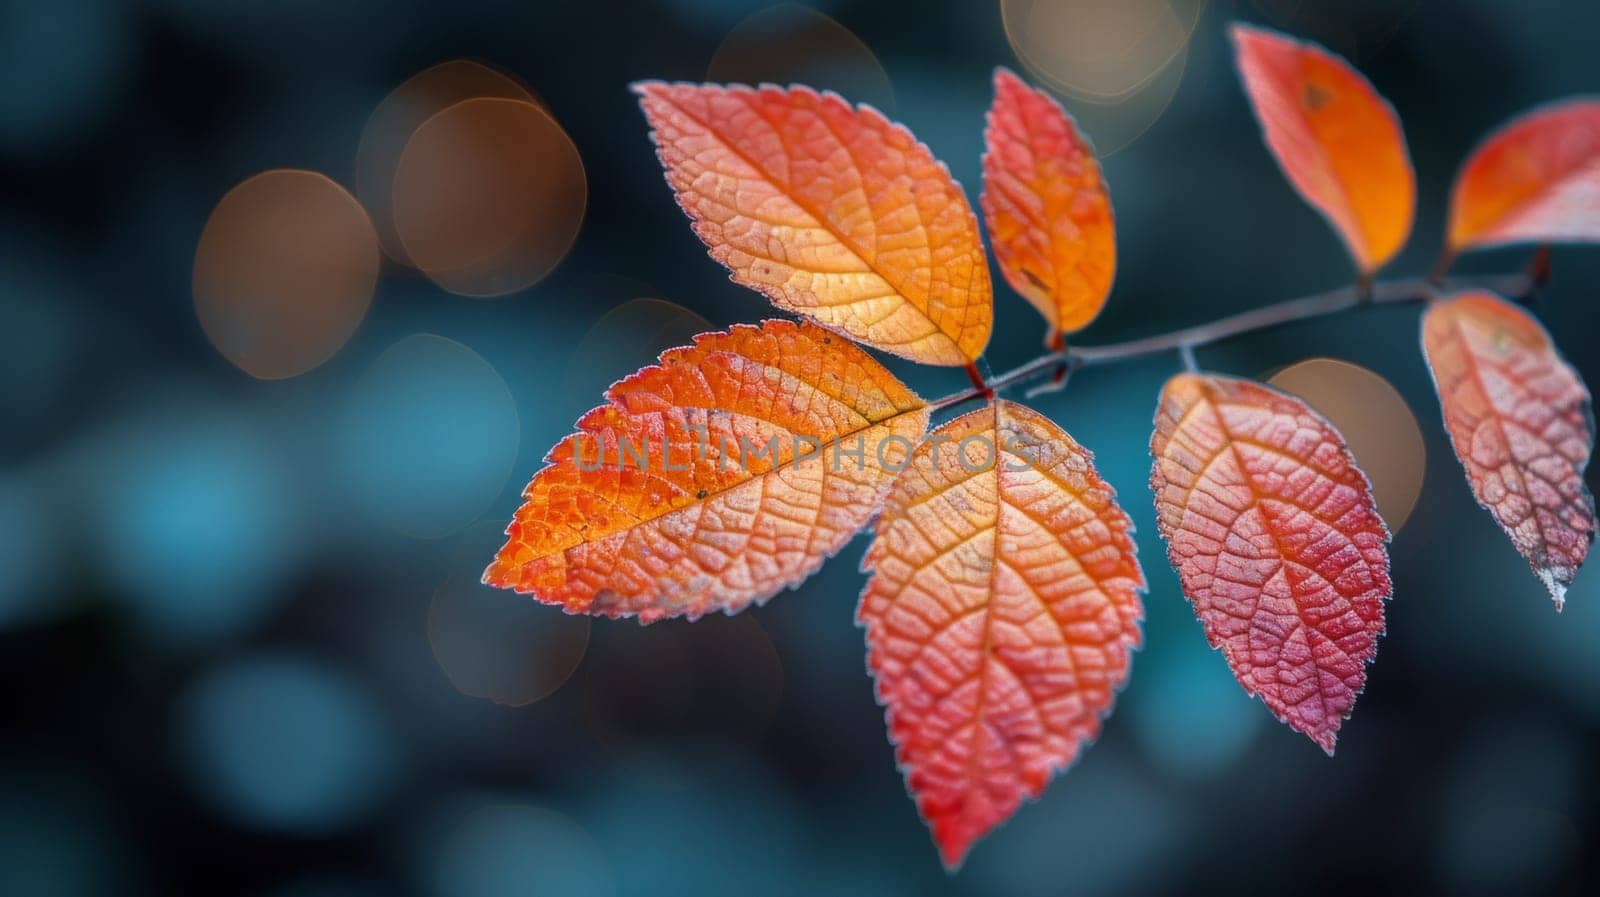 A close up of a leaf with red and orange colors